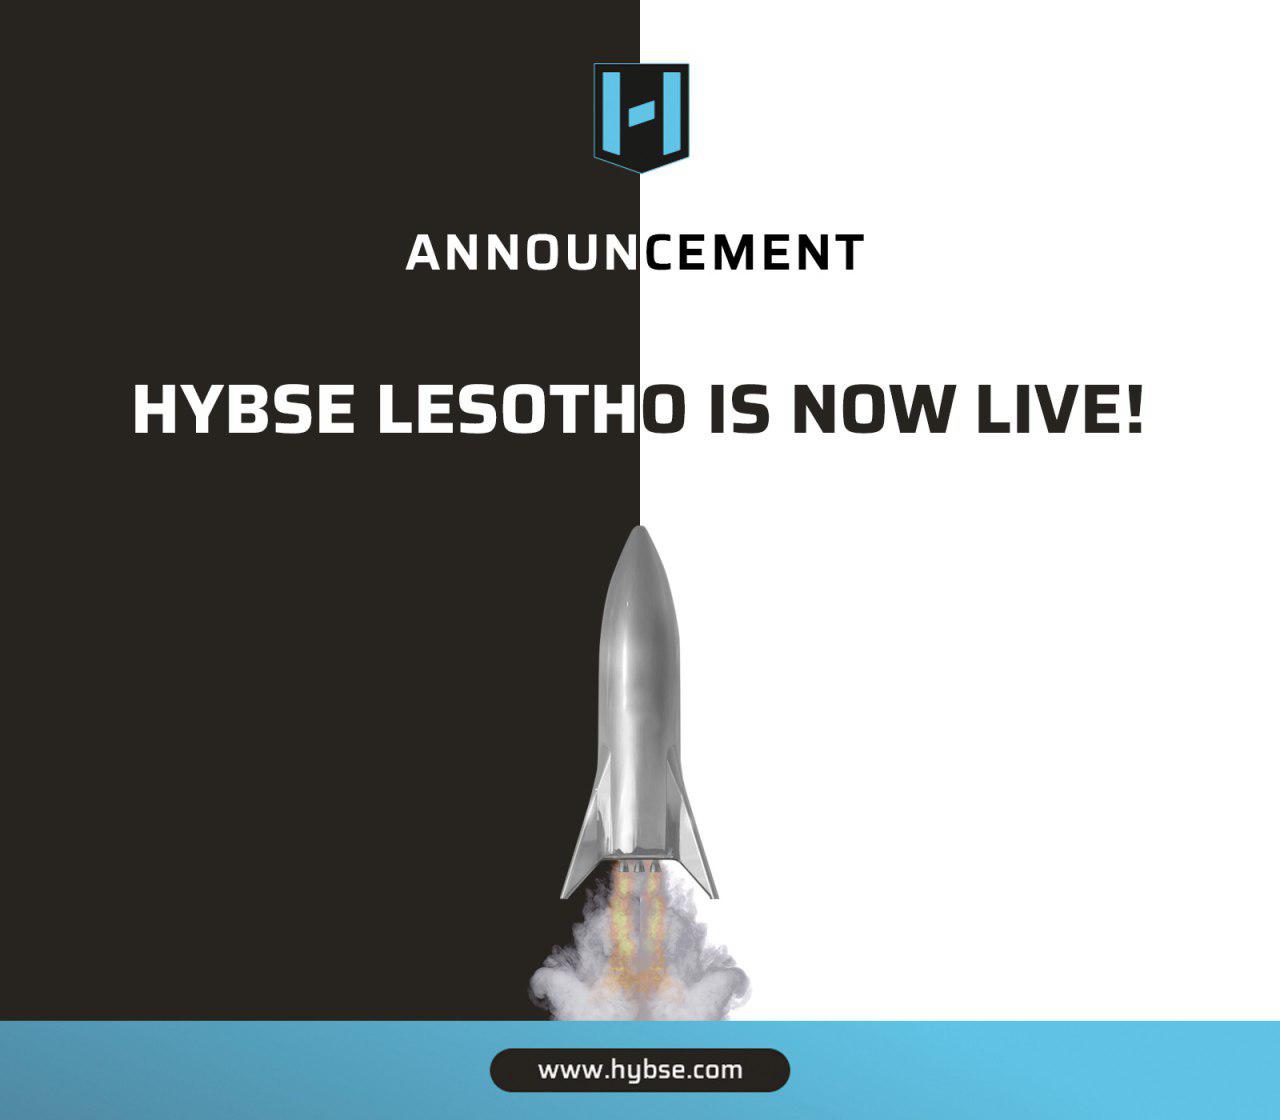  hybse lesotho dlt launch exchange doing speed 